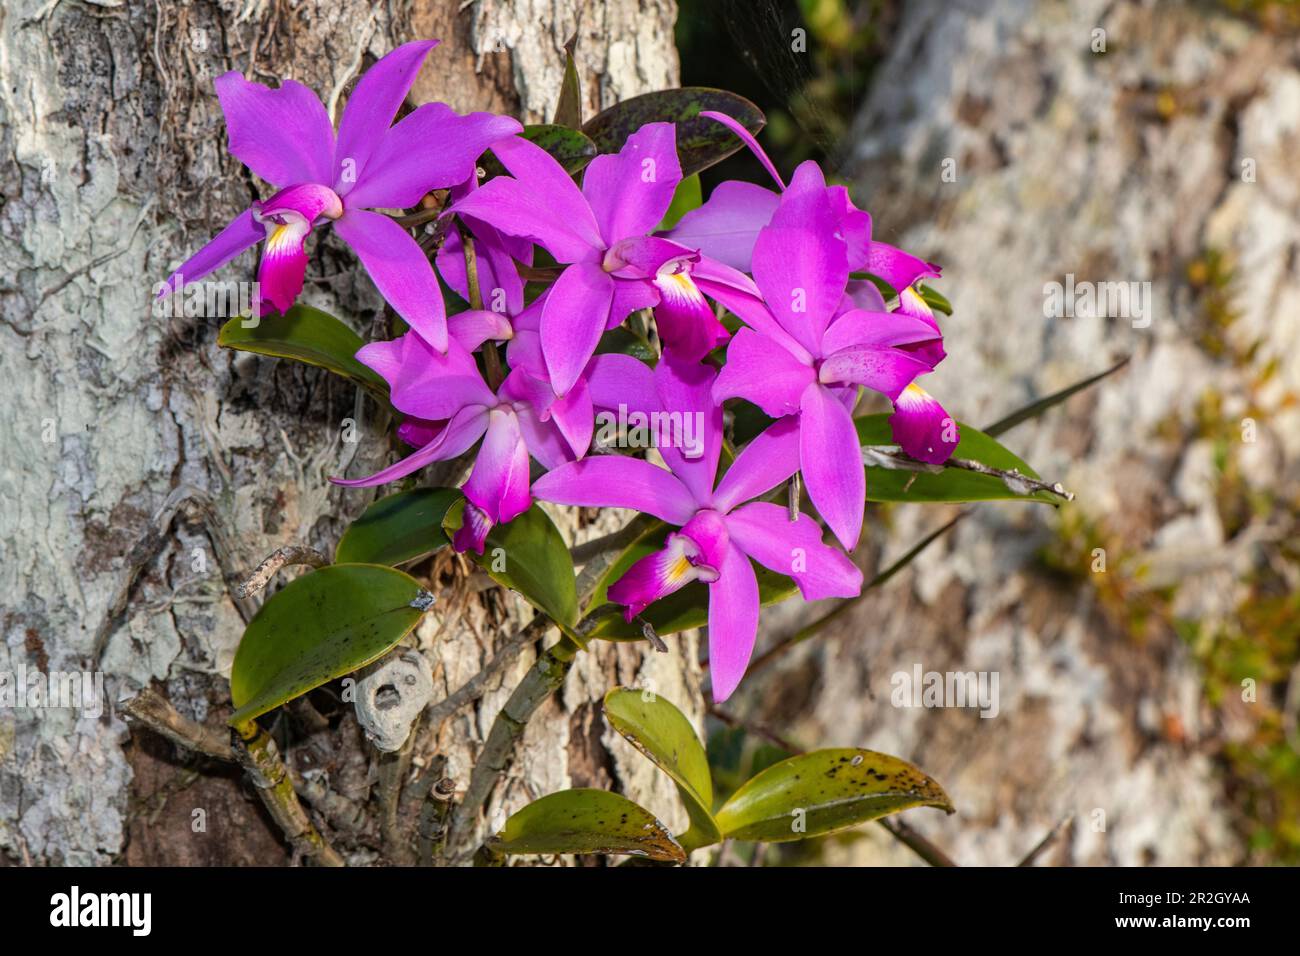 Brazil's national orchid, a Cattleya labiata, grows high in the branches of a tree, near Manaus, Amazon, Brazil, South America Stock Photo